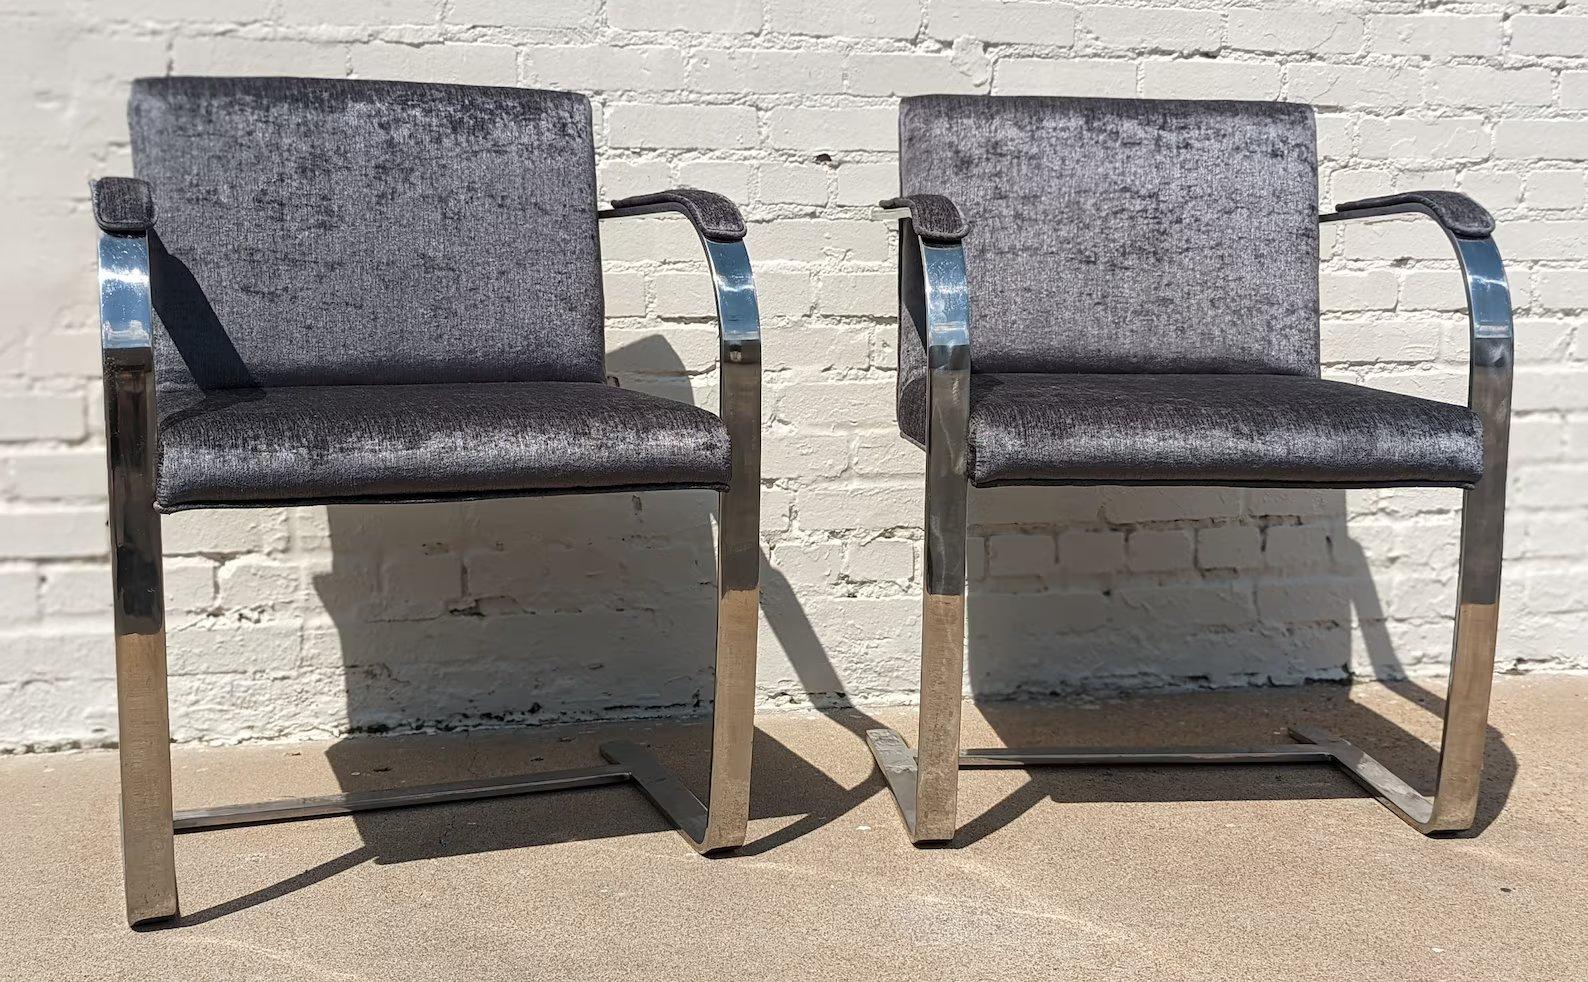 Pair of Mid Century Modern Mies Van Der Rohe Flatbar Chairs

Sold as pair. Above average vintage condition and structurally sound. Has some expected slight finish wear on stainless steel. Fabric is new. Outdoor listing pictures might appear slightly